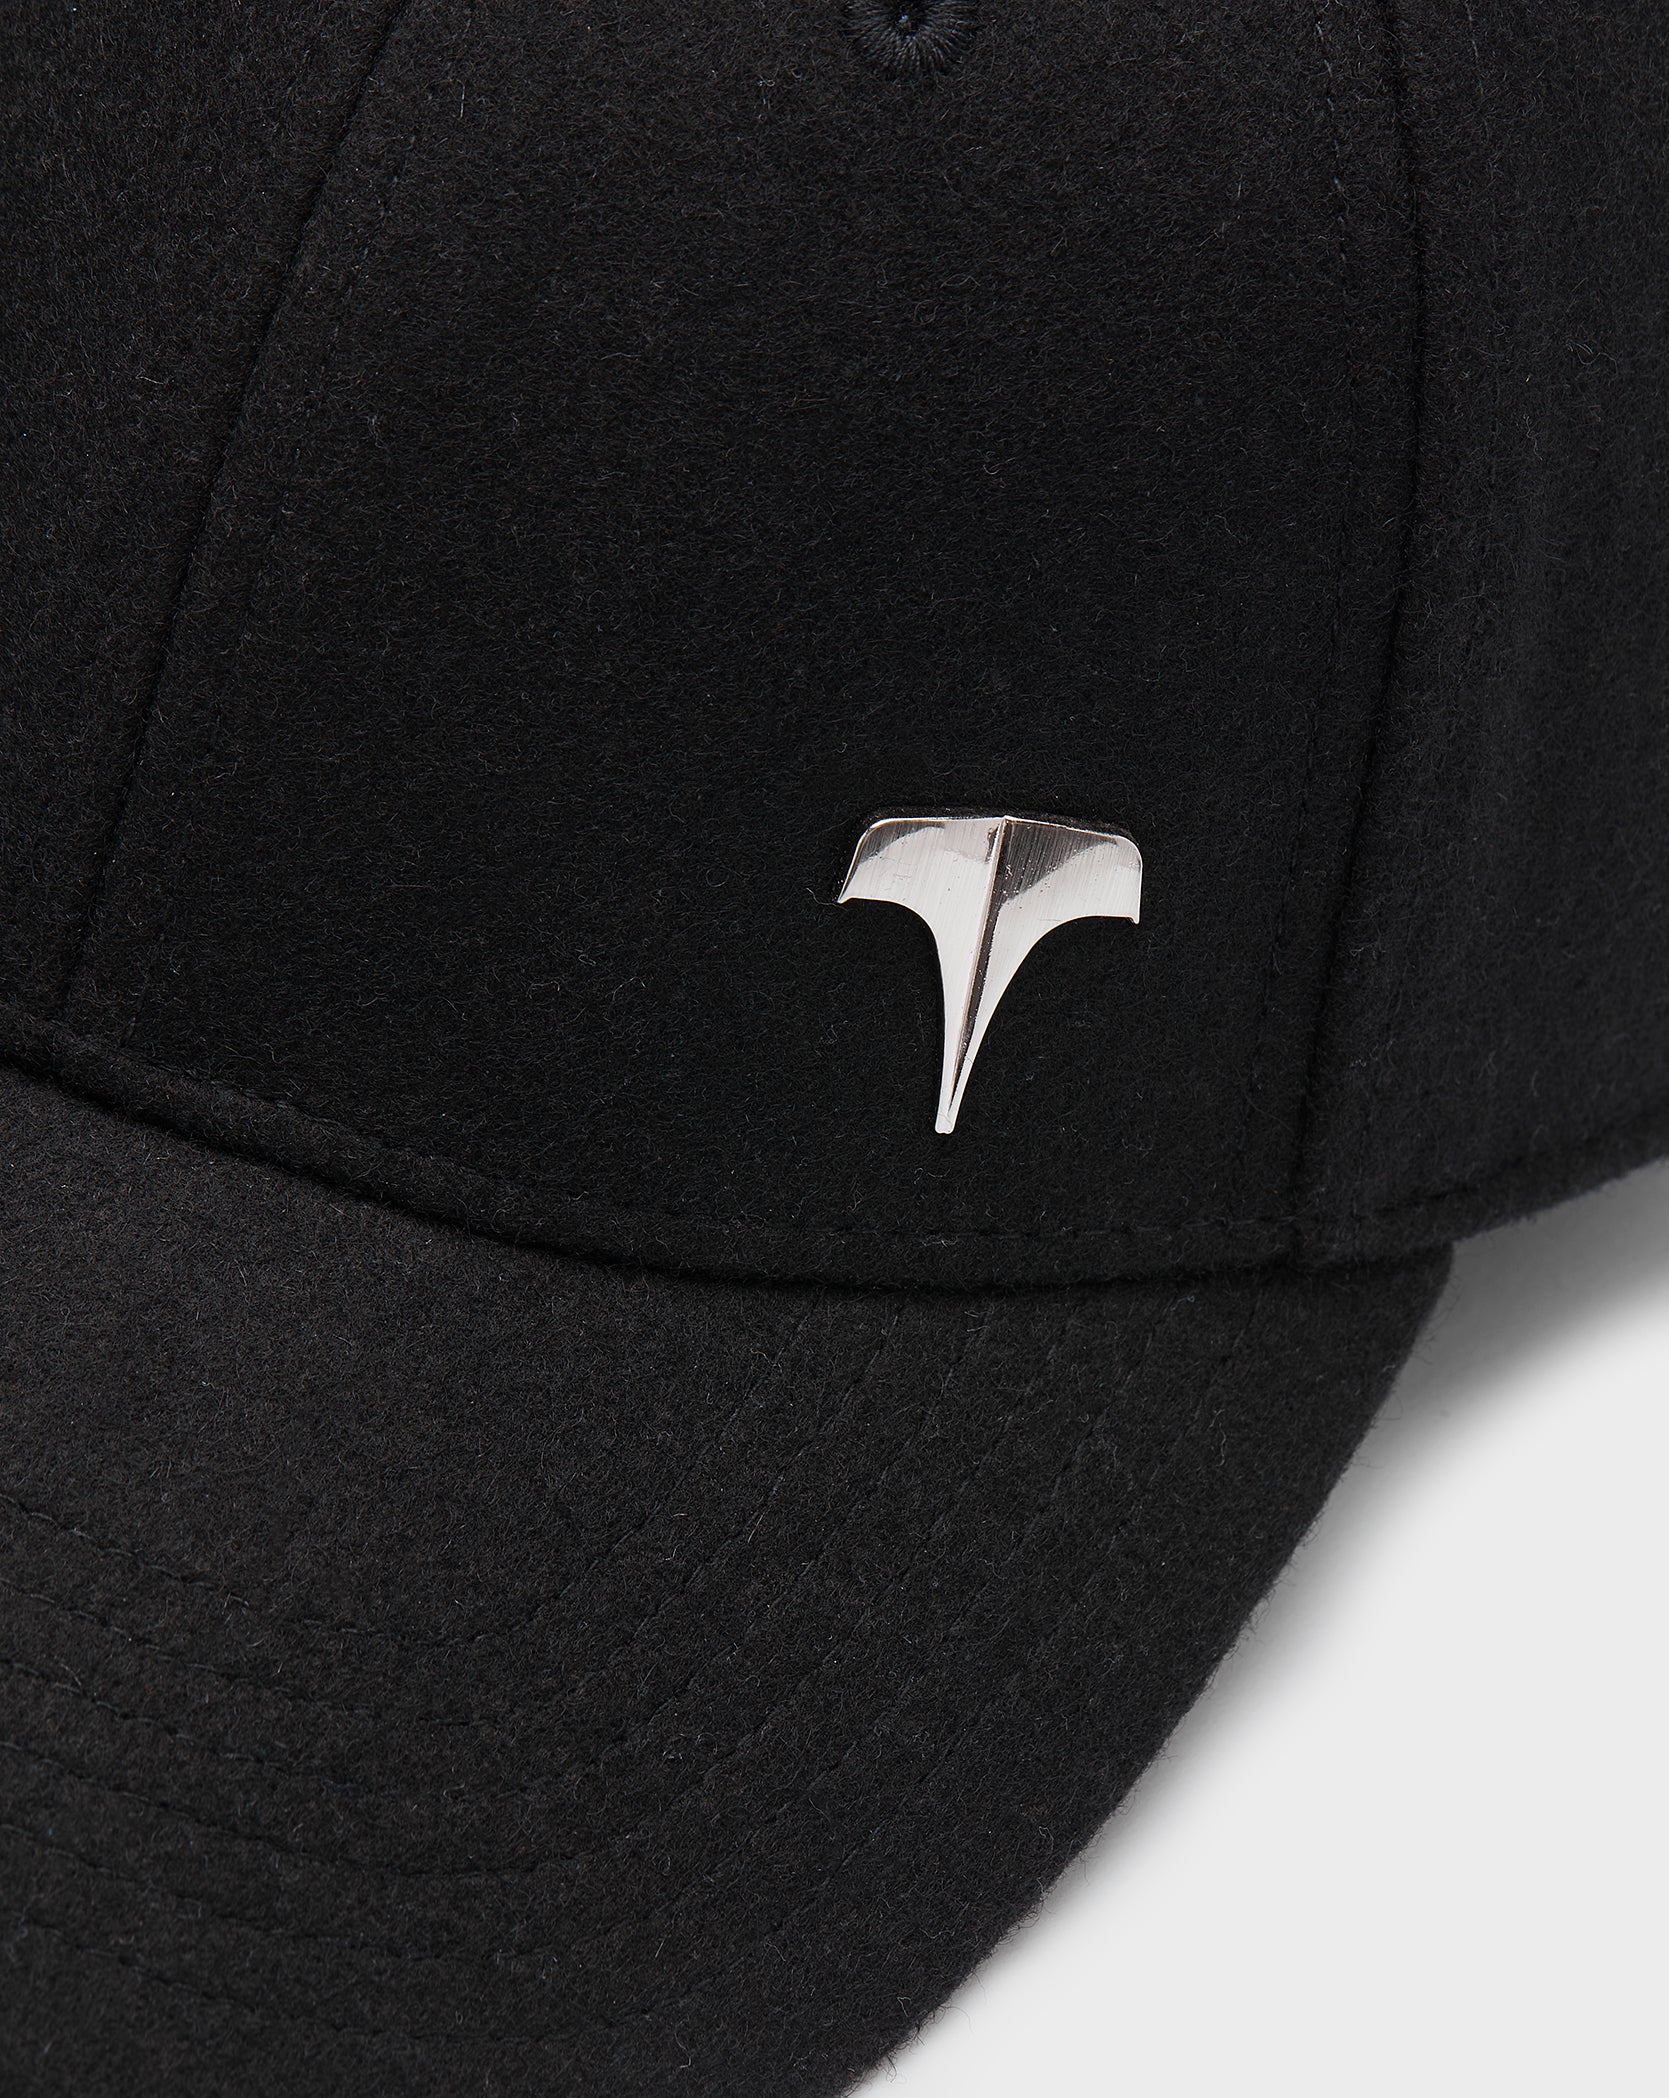 Twinzz black pitcher cap with small silver logo